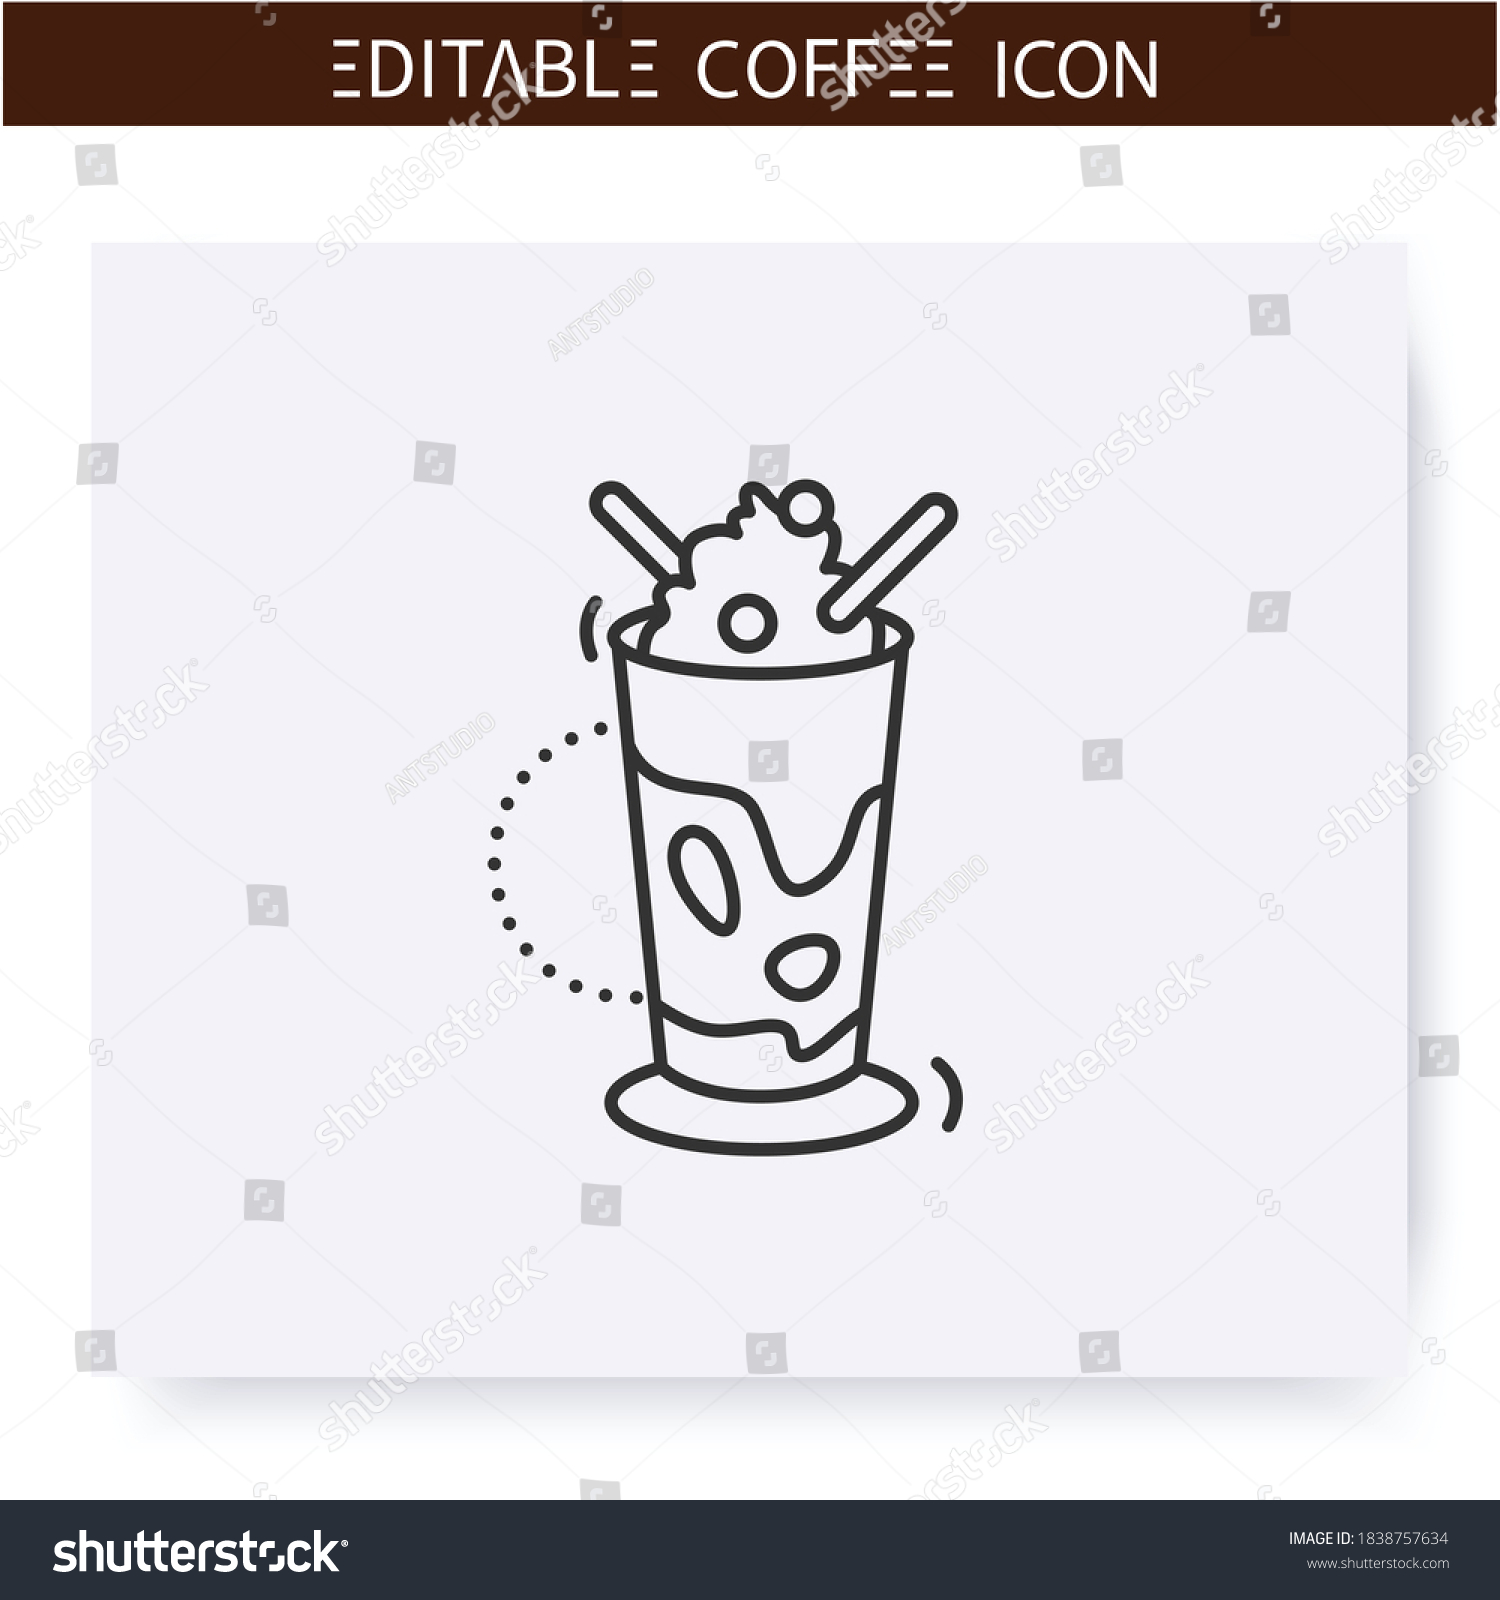 SVG of Glace coffee line icon.Type of coffee drink, cold brewed with ice cream and whipped cream. Coffeehouse menu. Different caffeine drinks receipts concept. Isolated vector illustration. Editable stroke svg